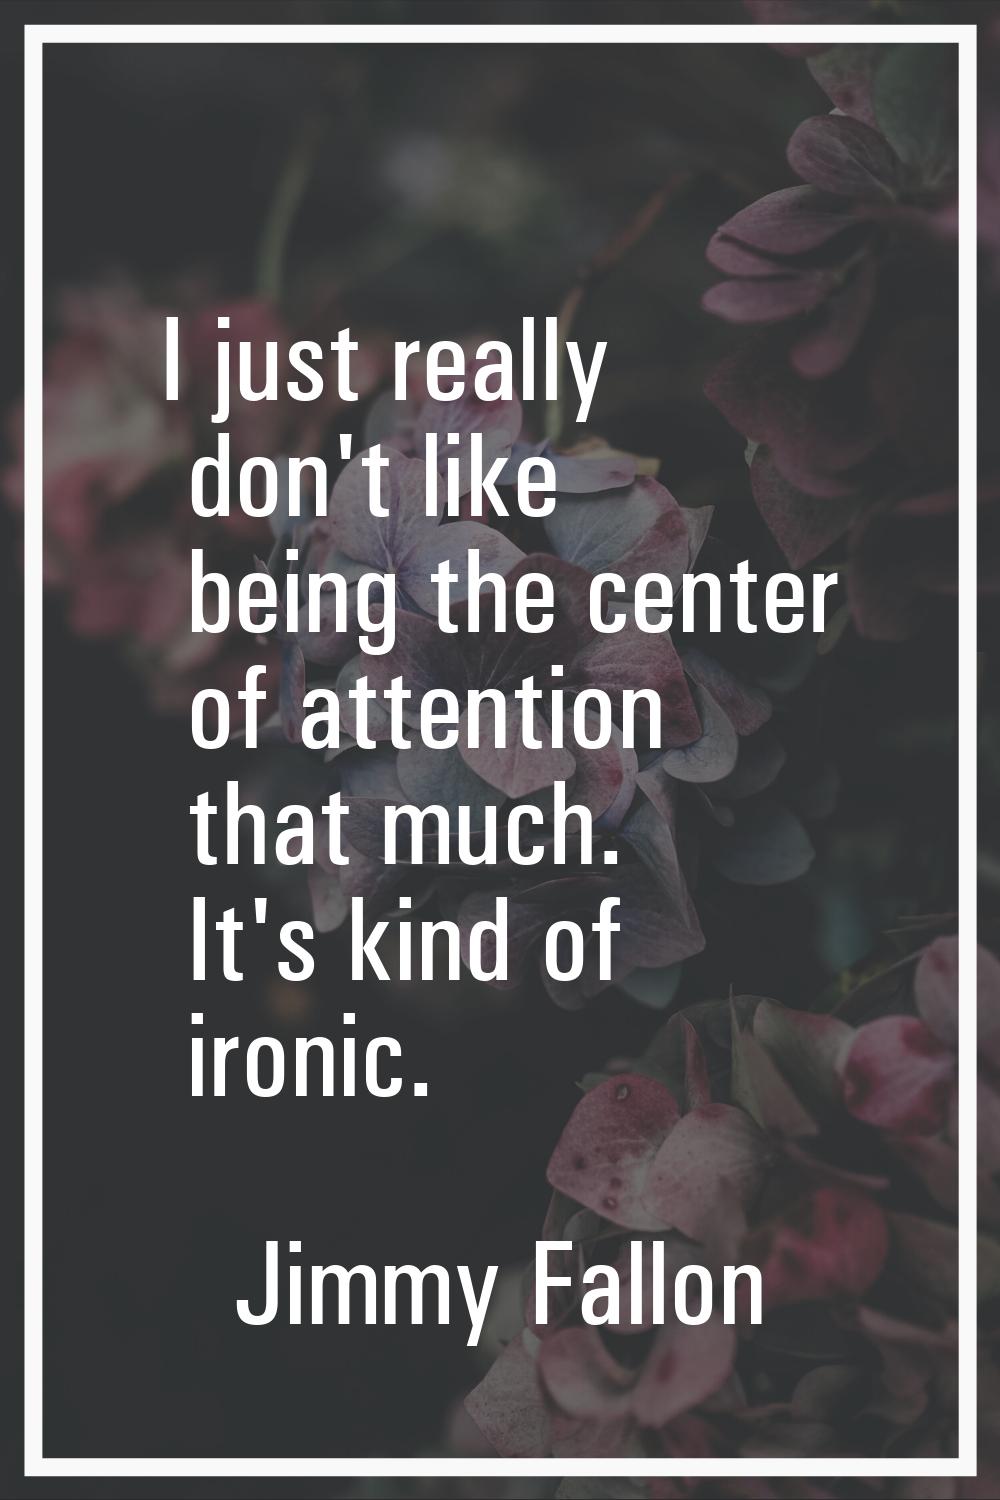 I just really don't like being the center of attention that much. It's kind of ironic.